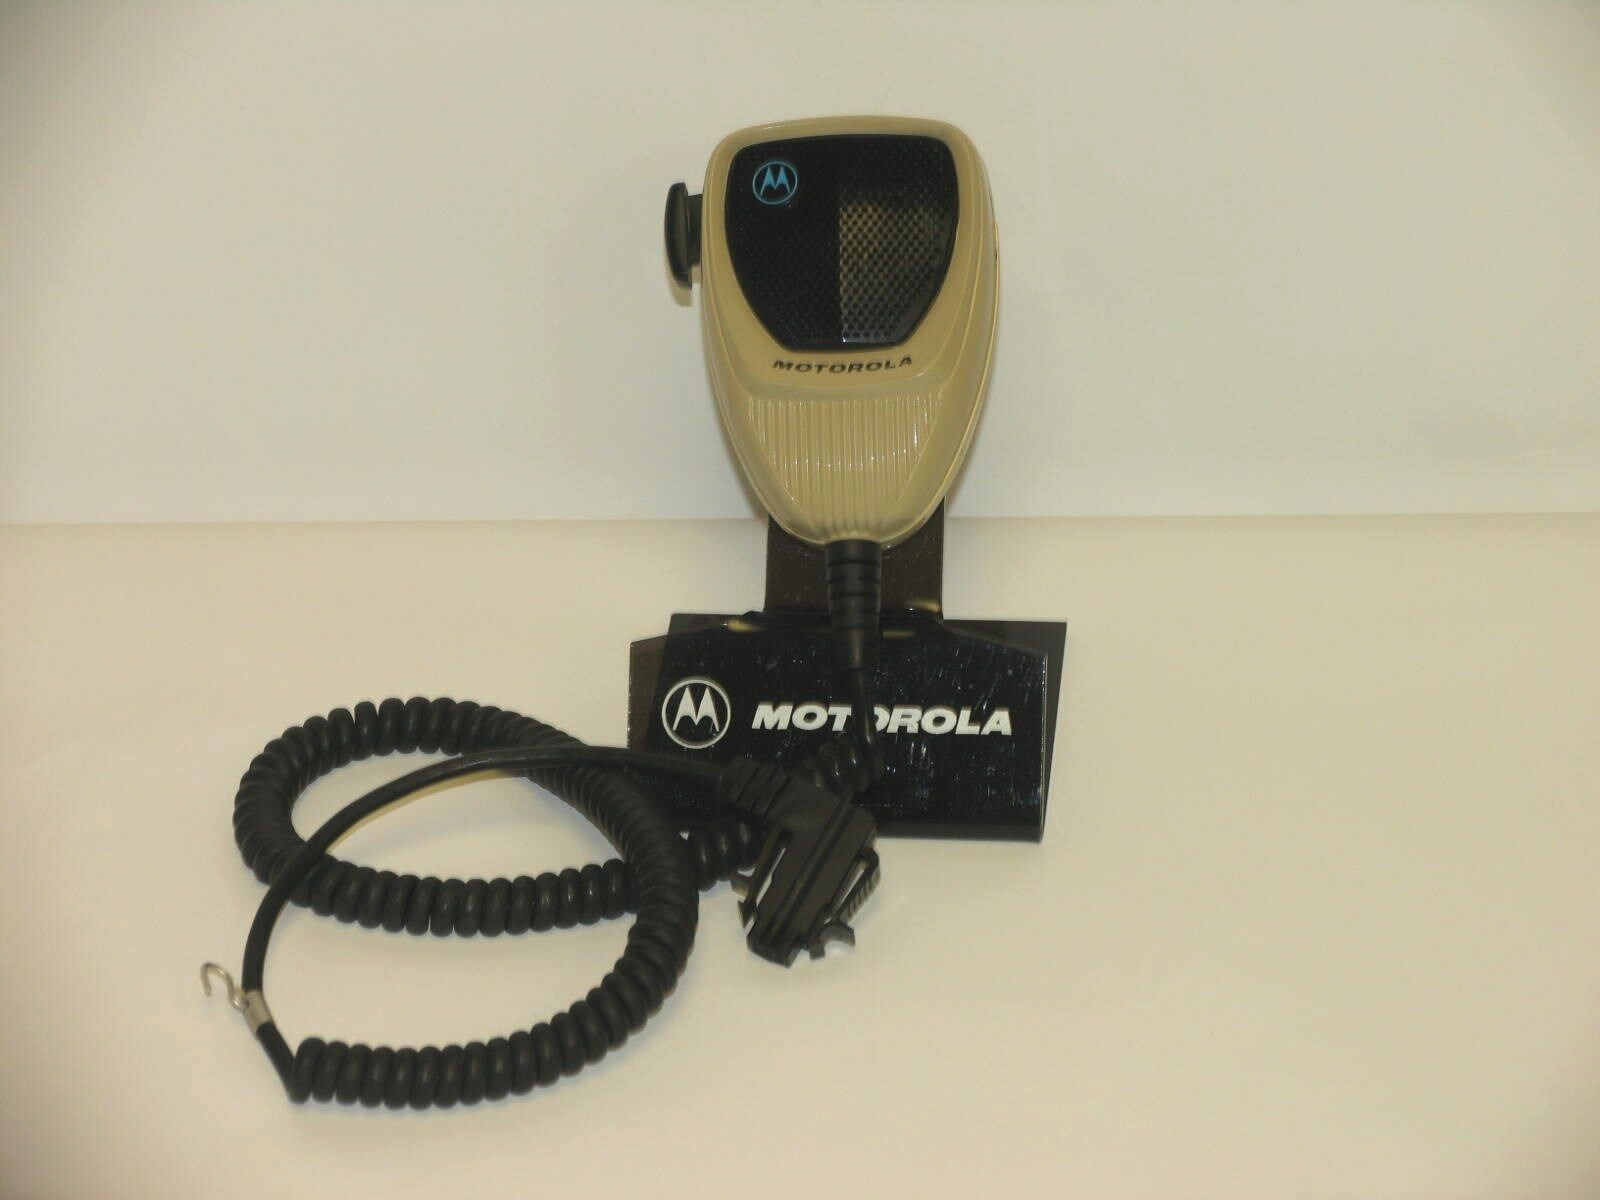 Motorola Palm Microphone HMN1080A Spectra, Astro Spectra, MaraTrac  USED. Available Now for $10.95